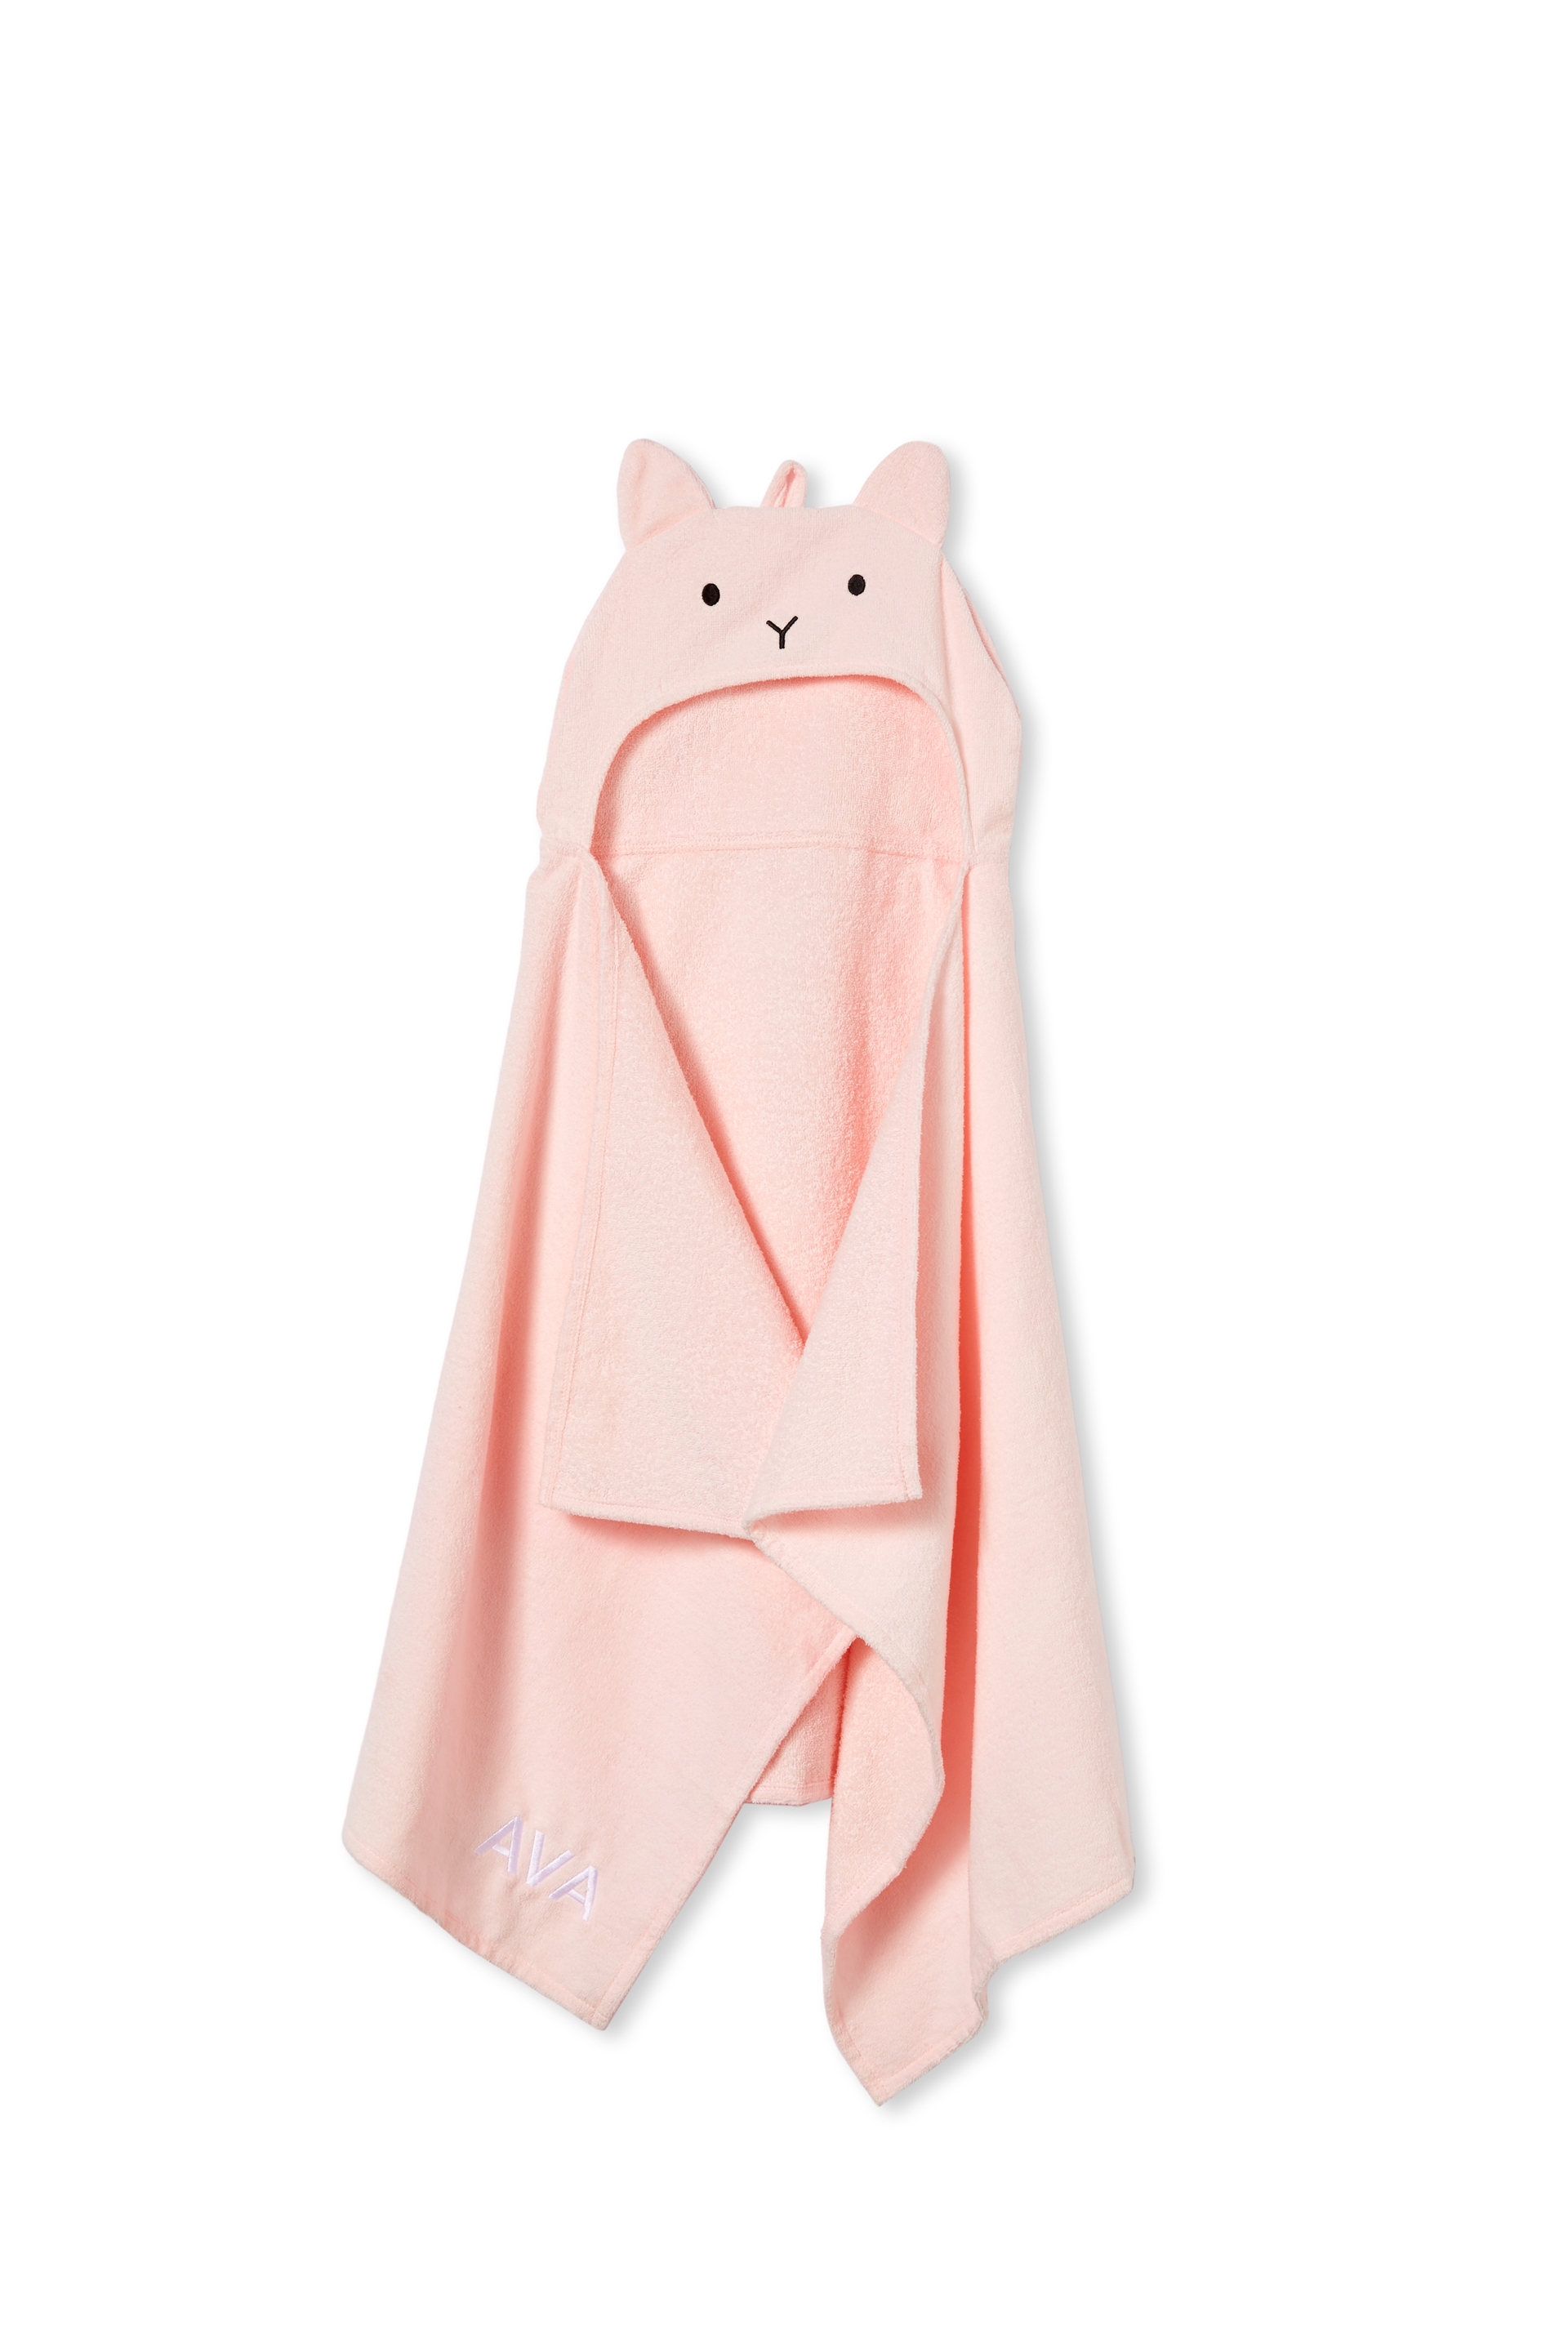 Cotton On Kids - Baby Snuggle Towel Personalised - Crystal pink bear